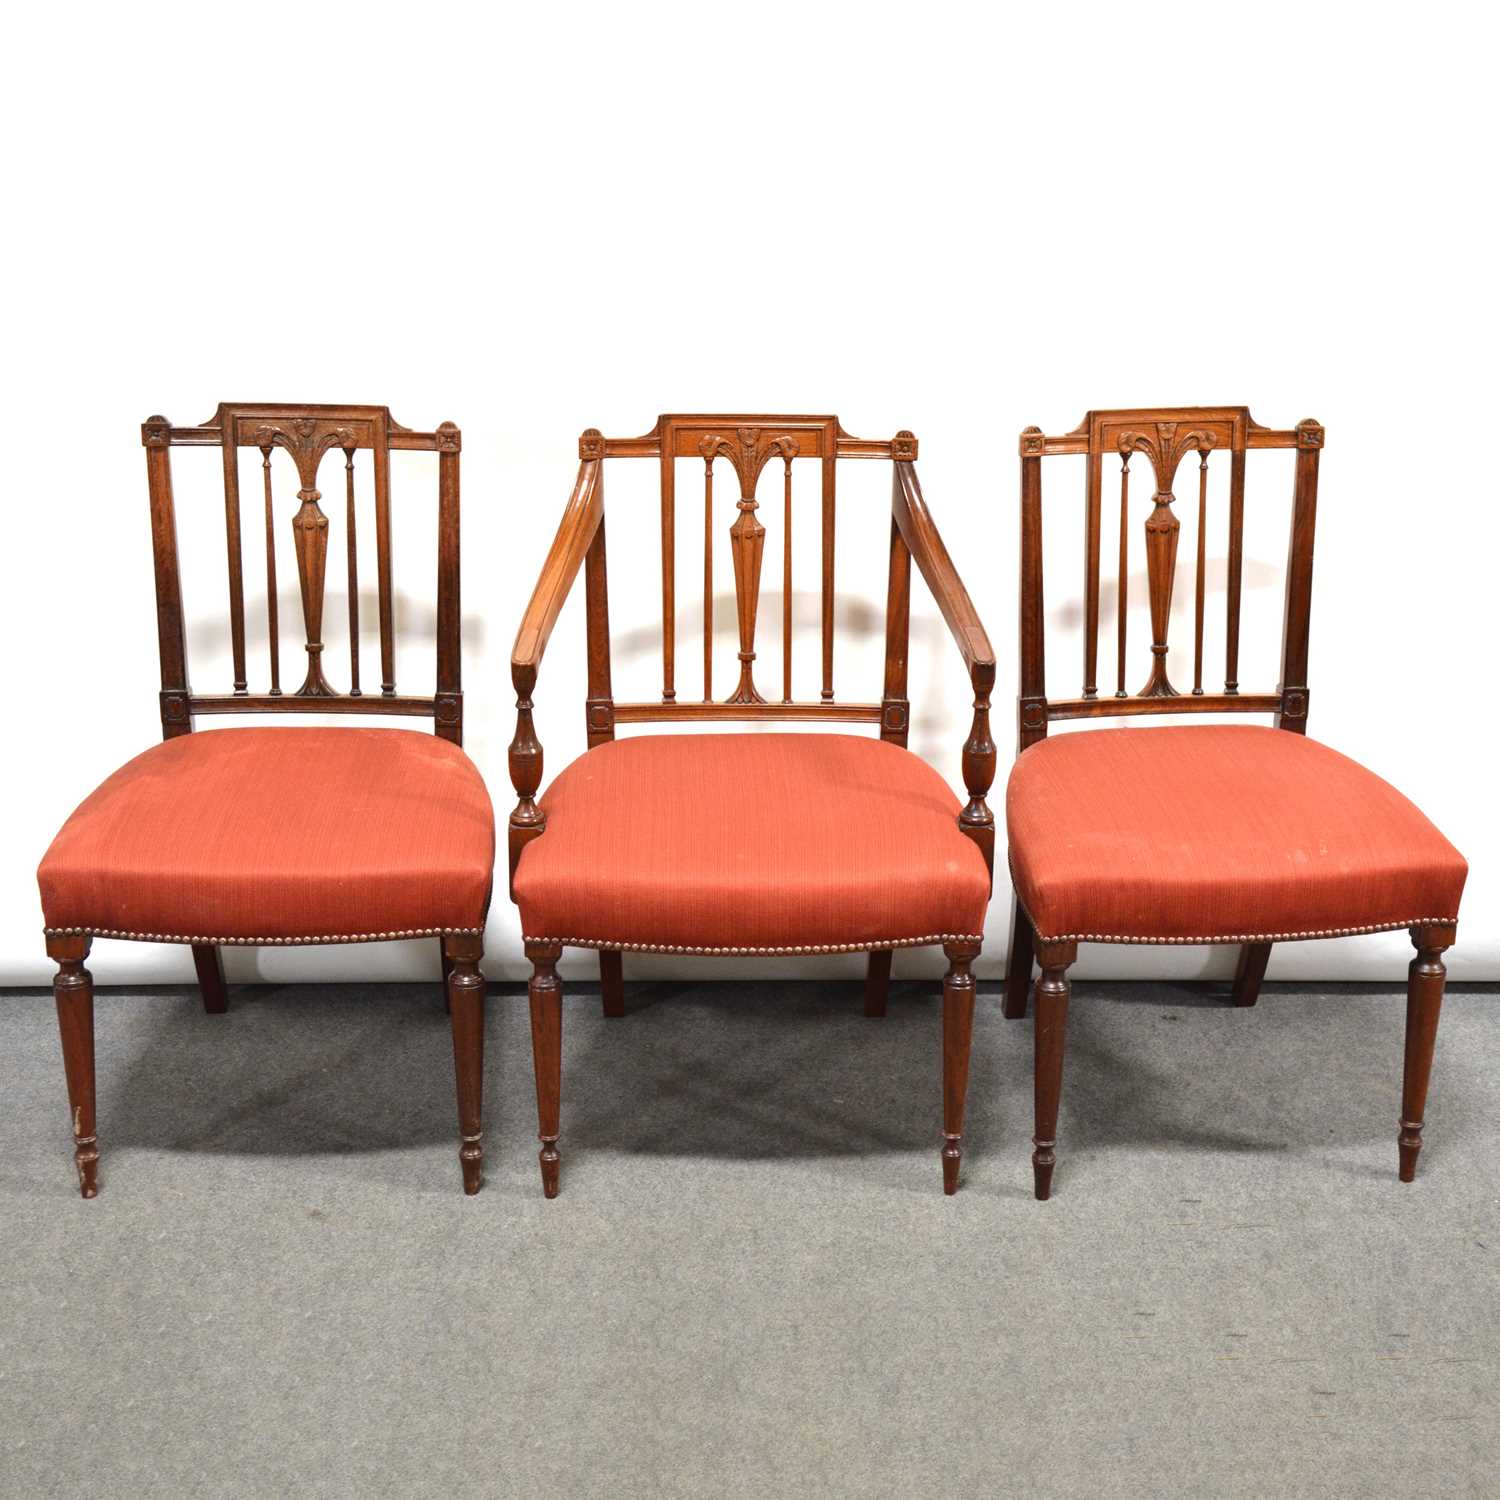 Set of sixteen Anglo-Indian Sheraton style mahogany dining chairs, 19th Century, - Image 2 of 2